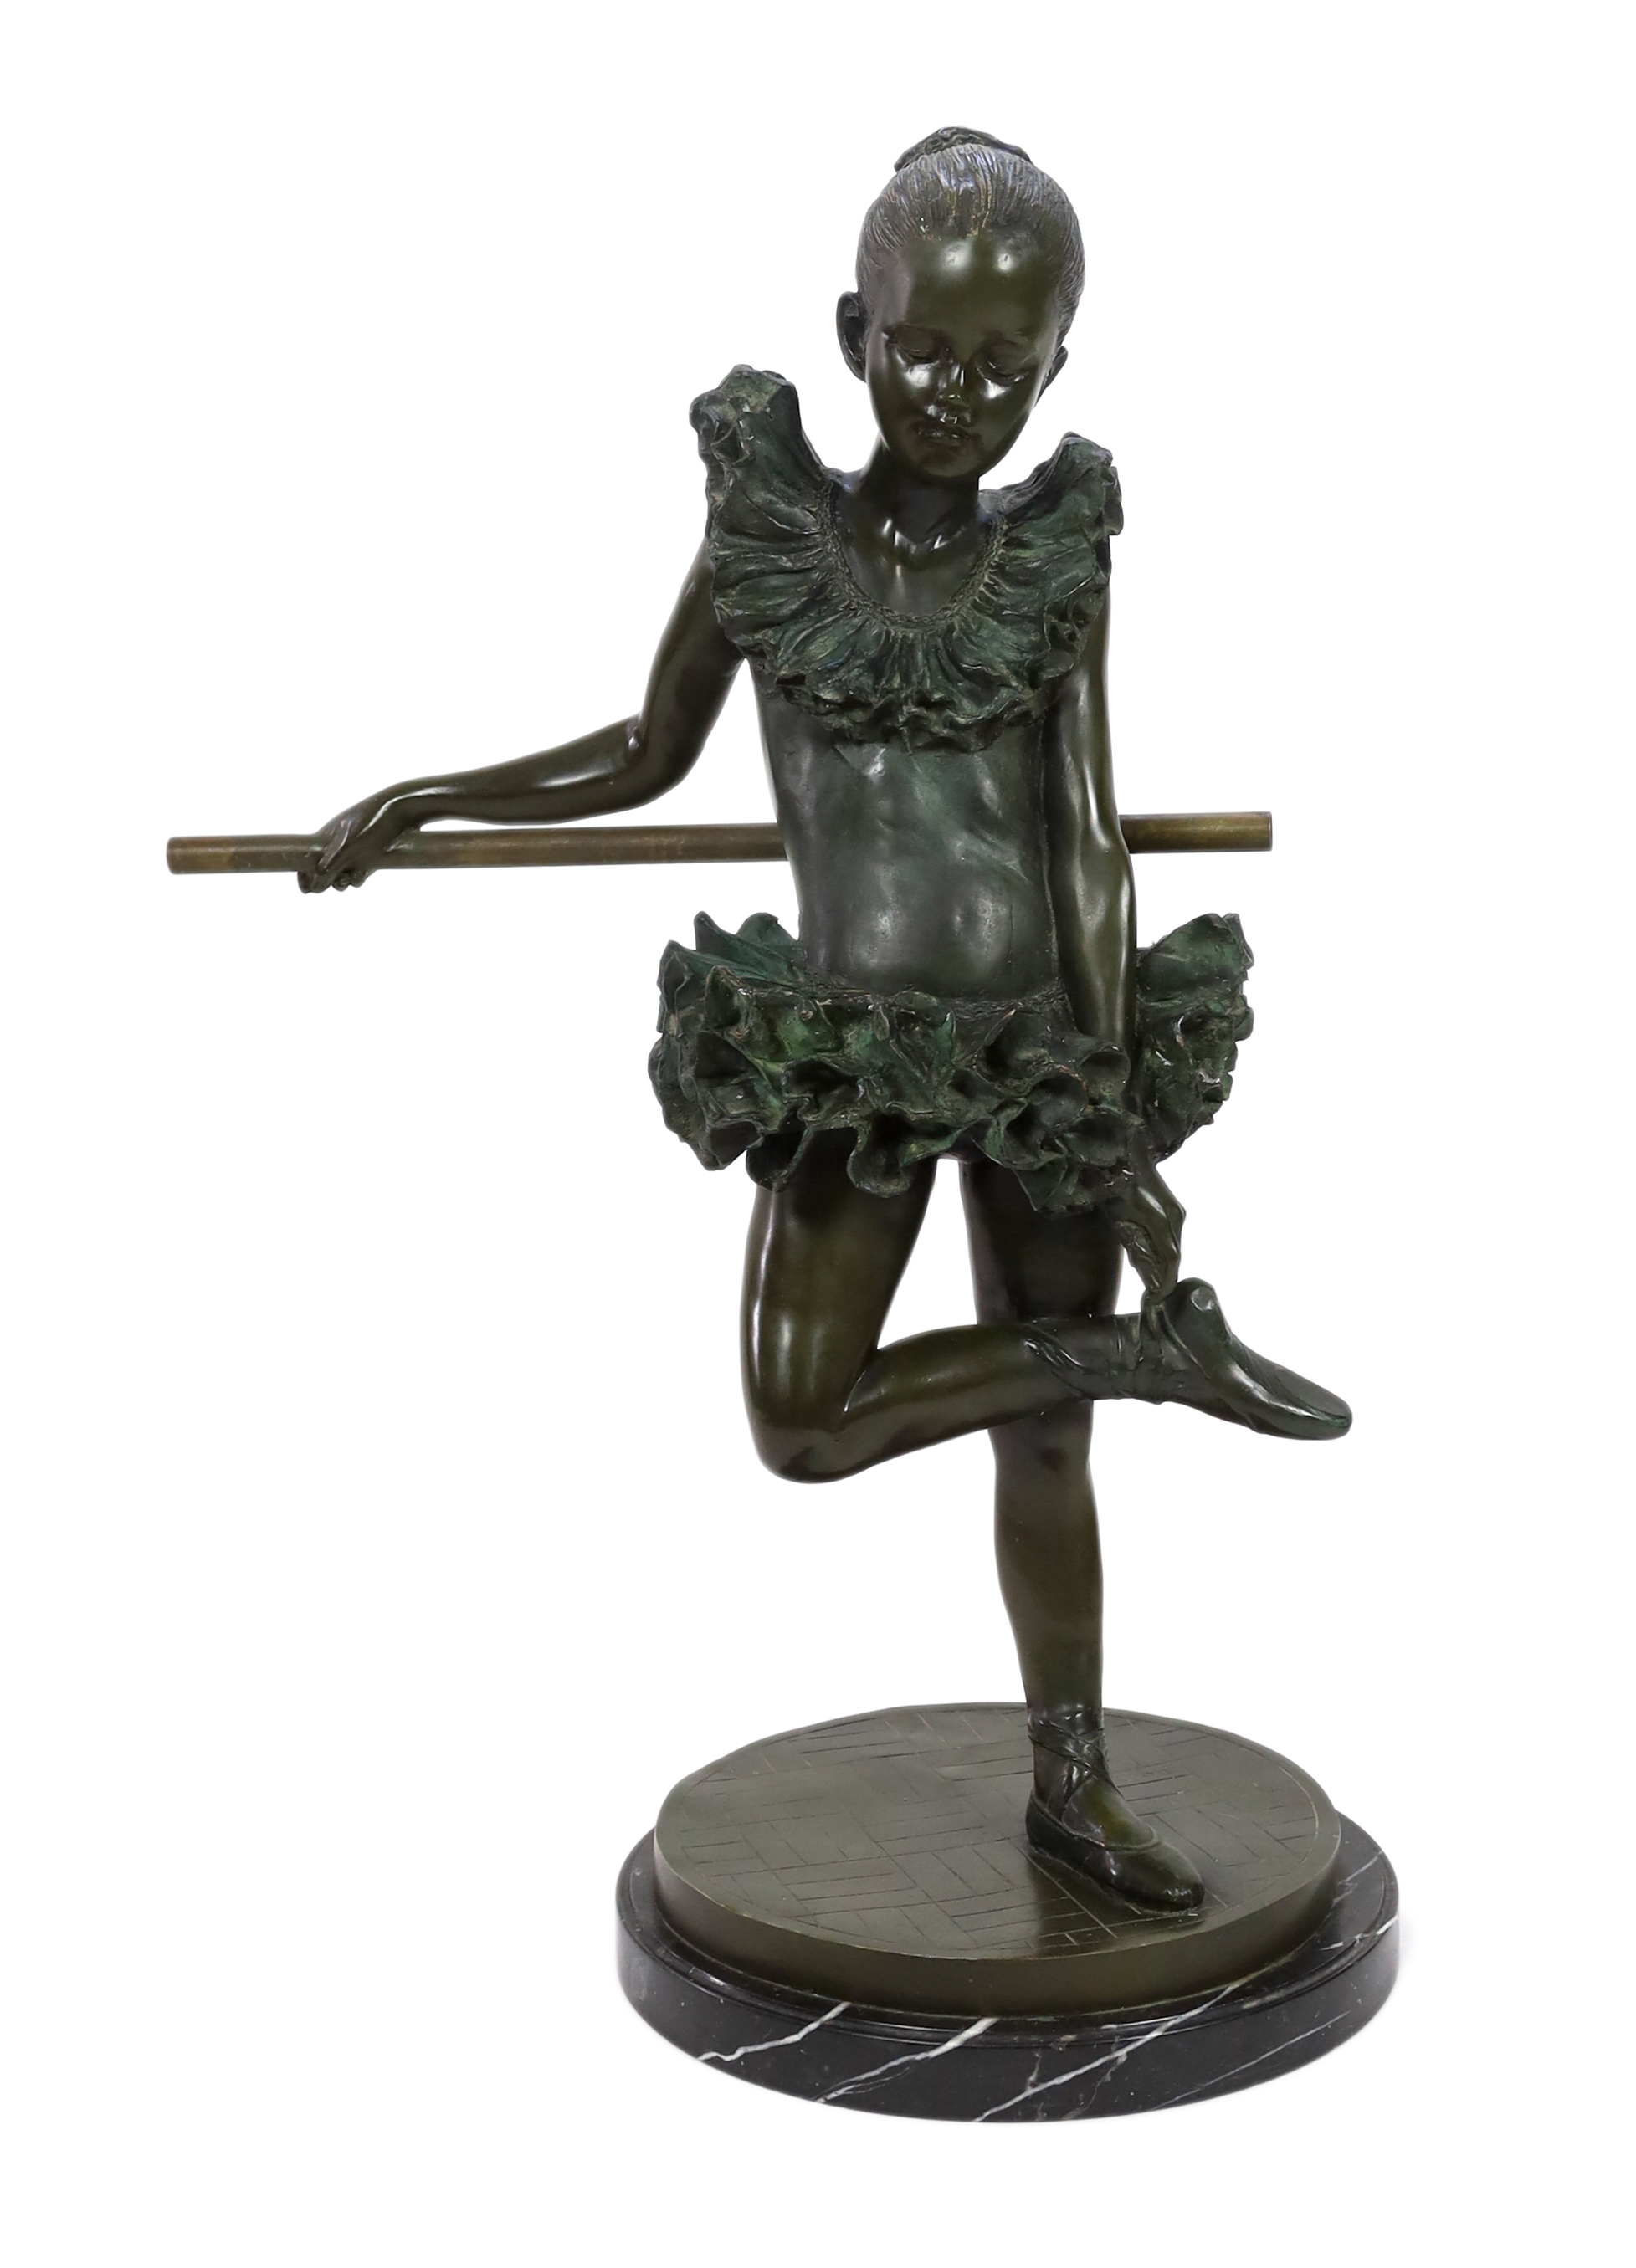 After Auguste Moreau (French, 1834-1917). A bronze figure of a ballerina